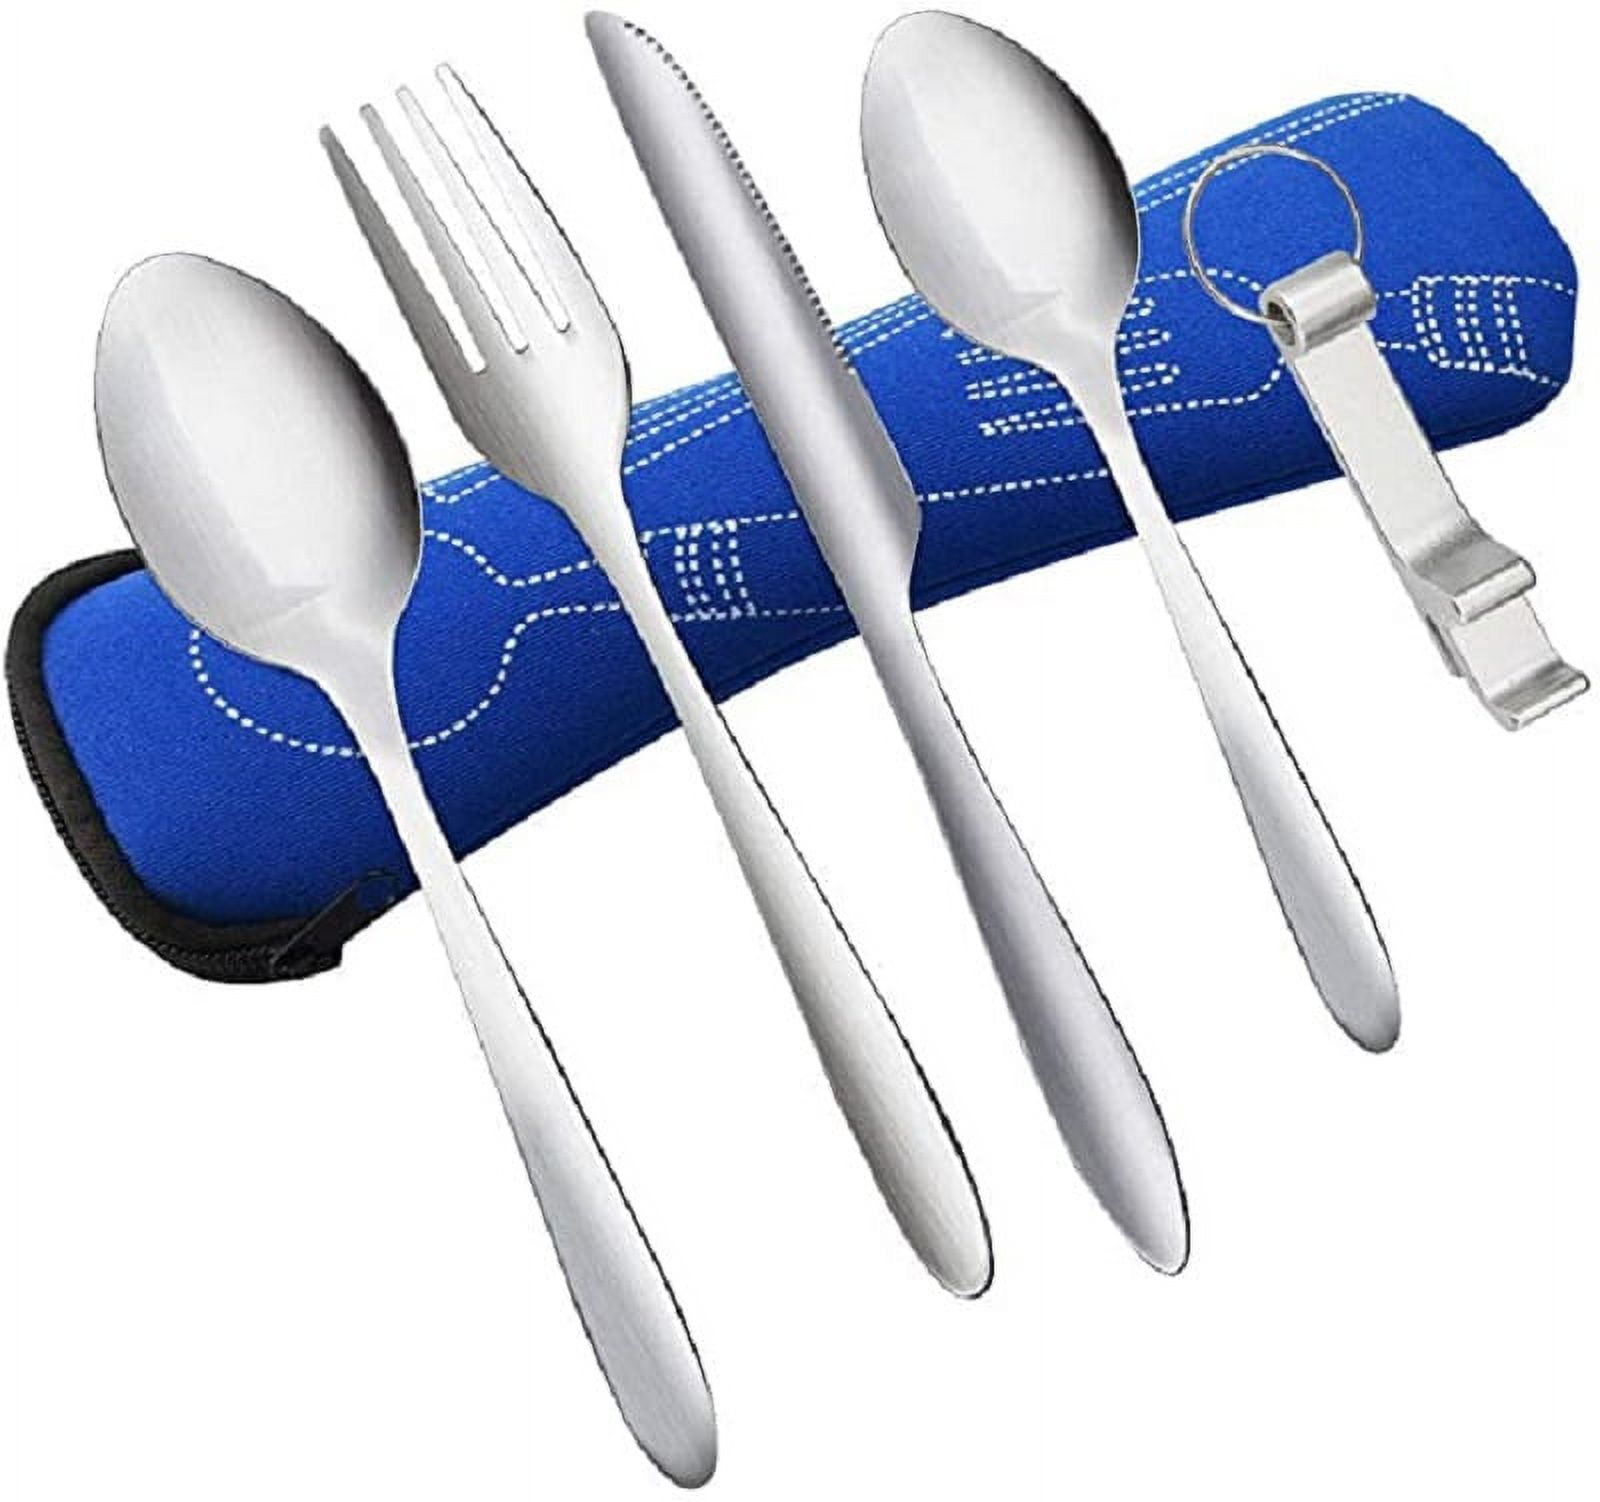 Travel Cutlery Set With Portable Case - Brilliant Promos - Be Brilliant!